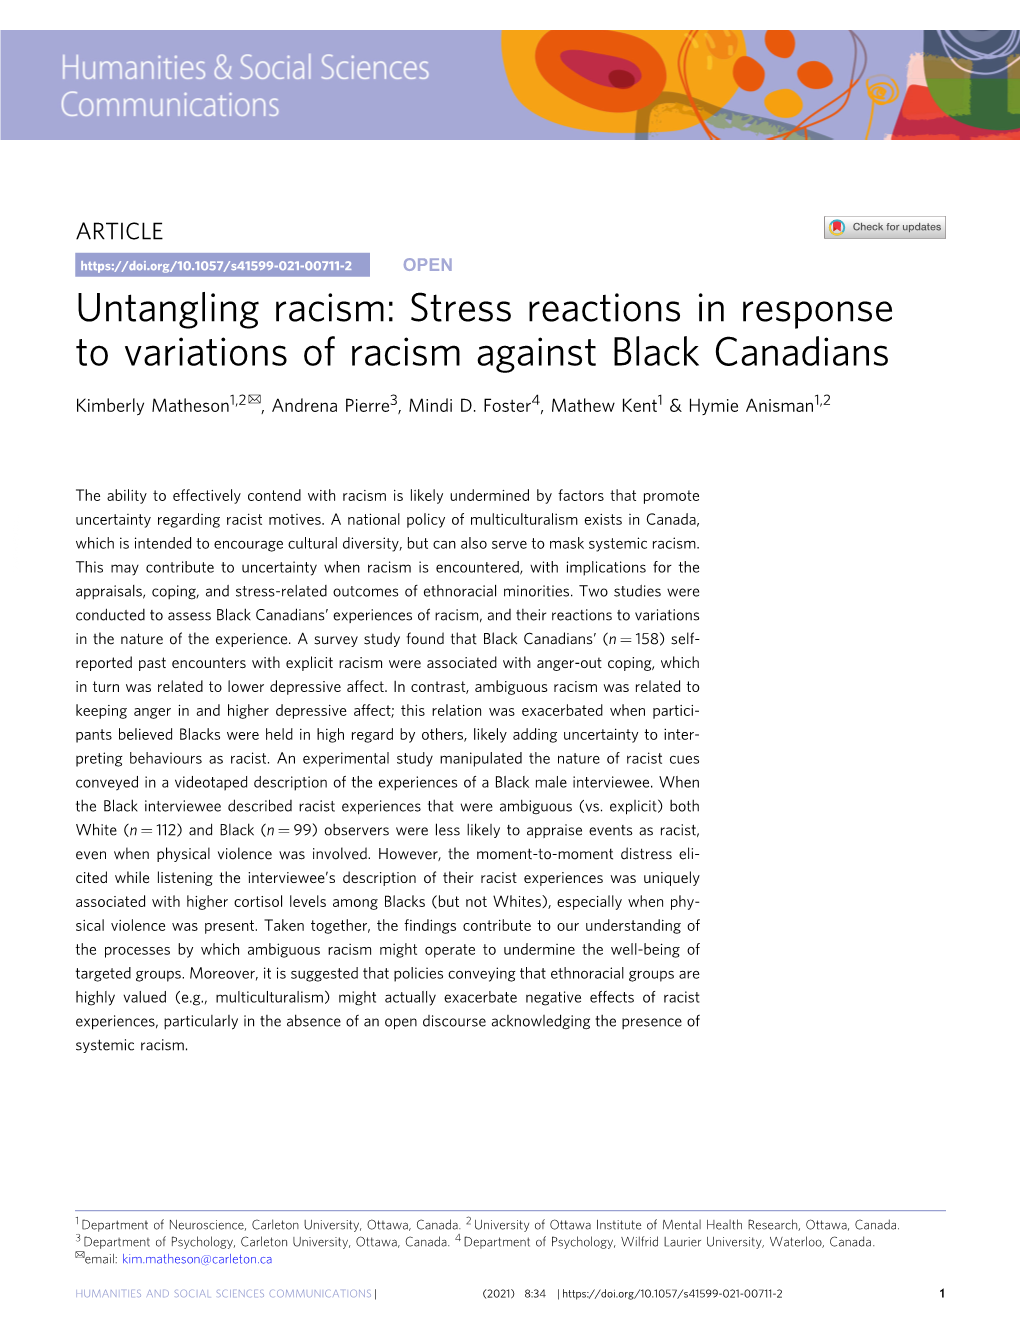 Untangling Racism: Stress Reactions in Response to Variations of Racism Against Black Canadians ✉ Kimberly Matheson1,2 , Andrena Pierre3, Mindi D